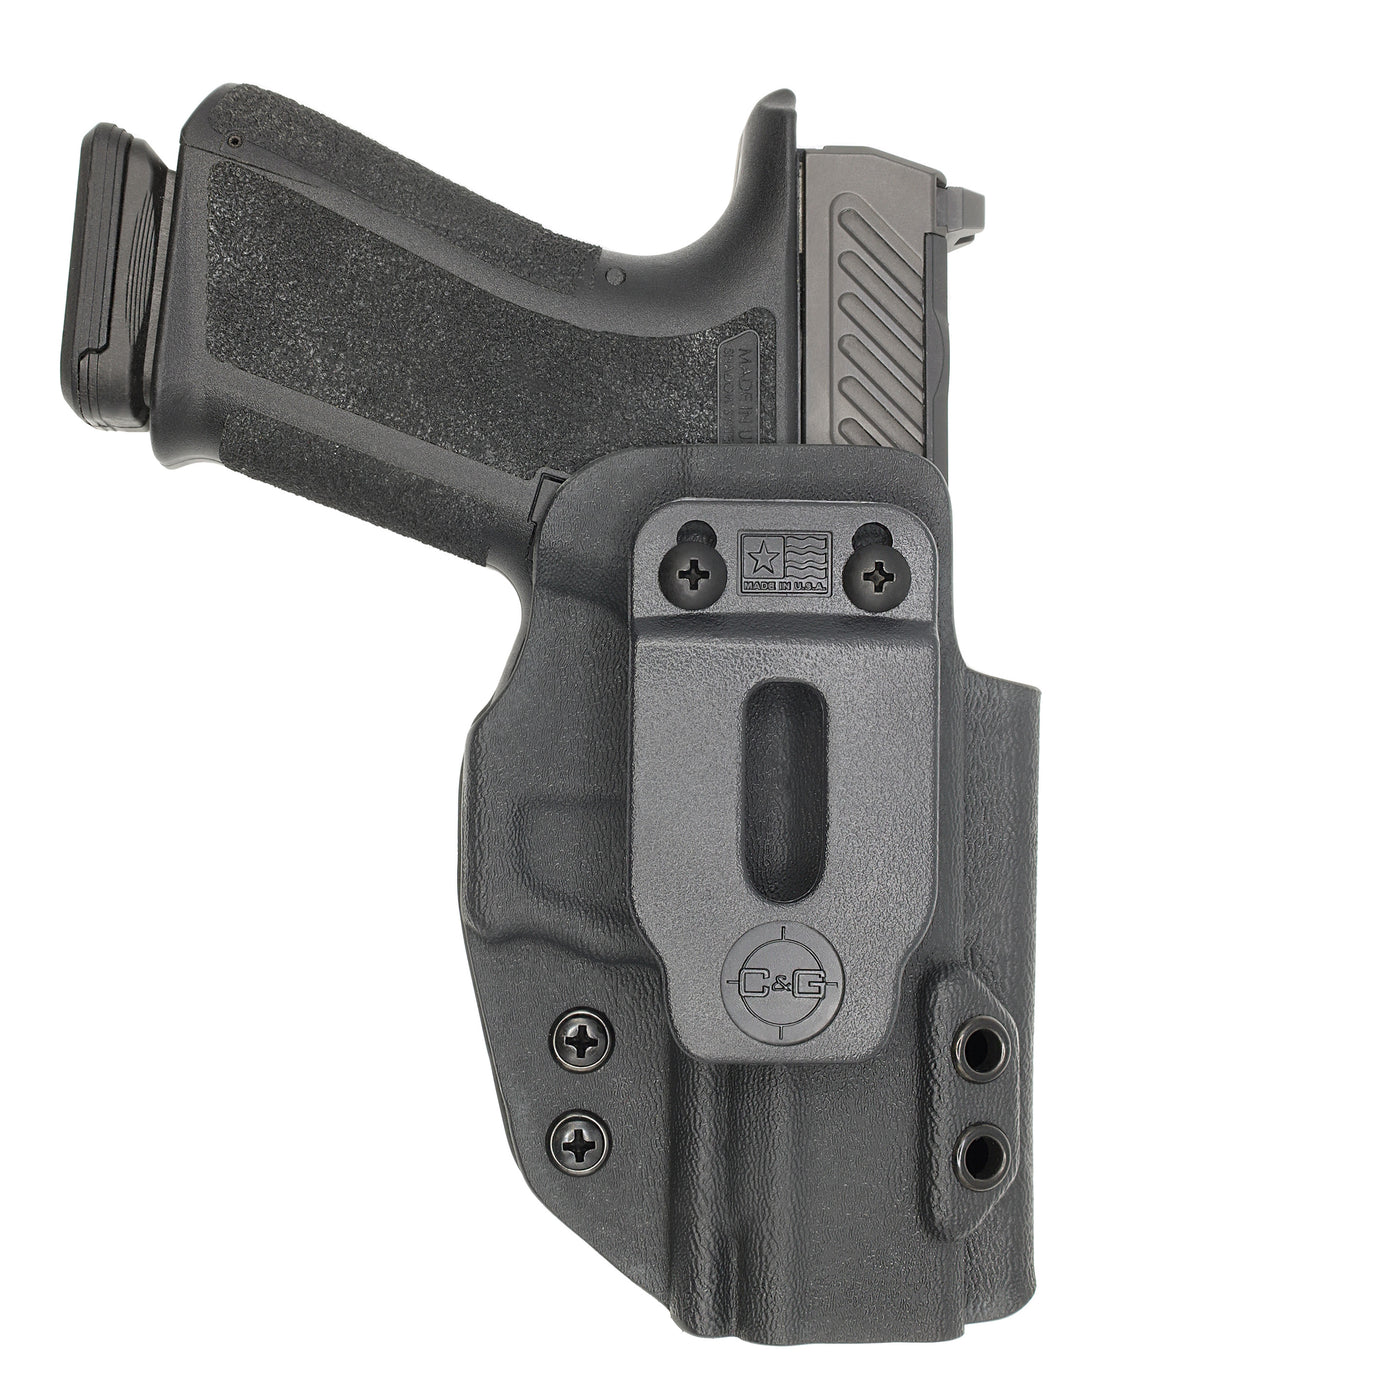 C&G Holsters Quickship IWB Covert Shadow Systems MR920 holstered